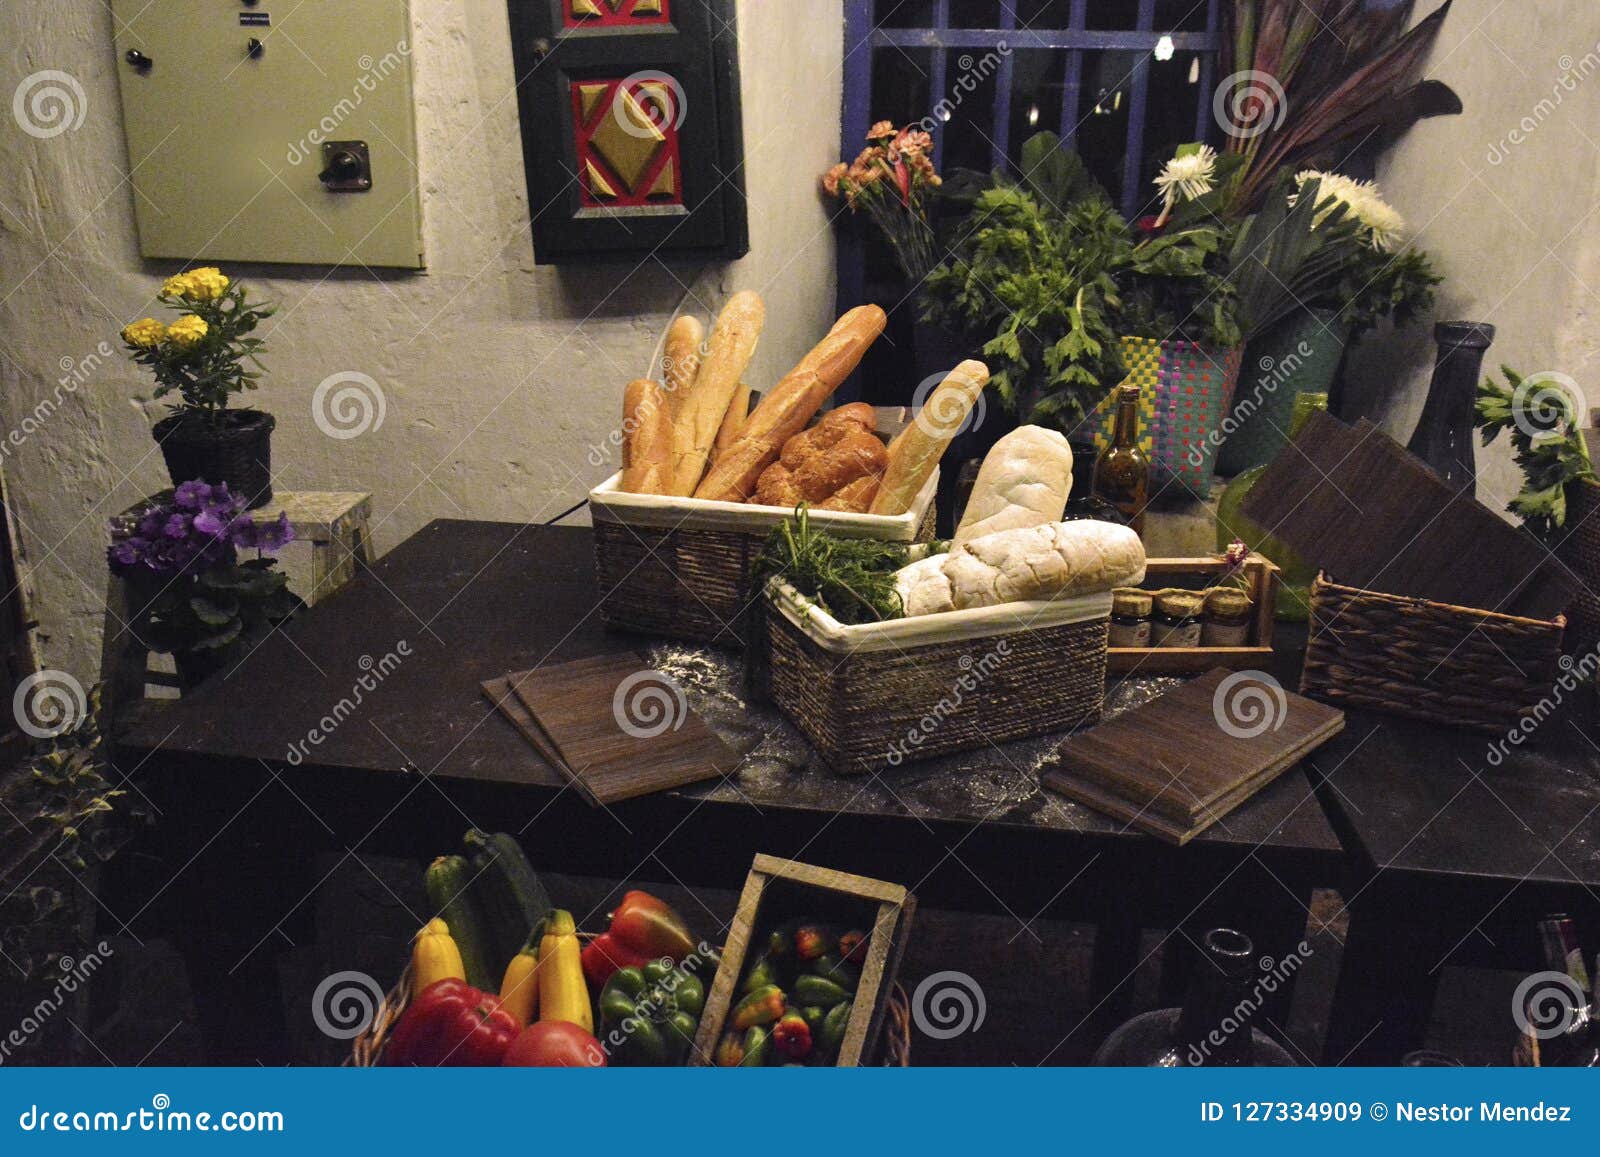 Basket with Bread. Vegetables and Flowers Stock Image - Image of wood